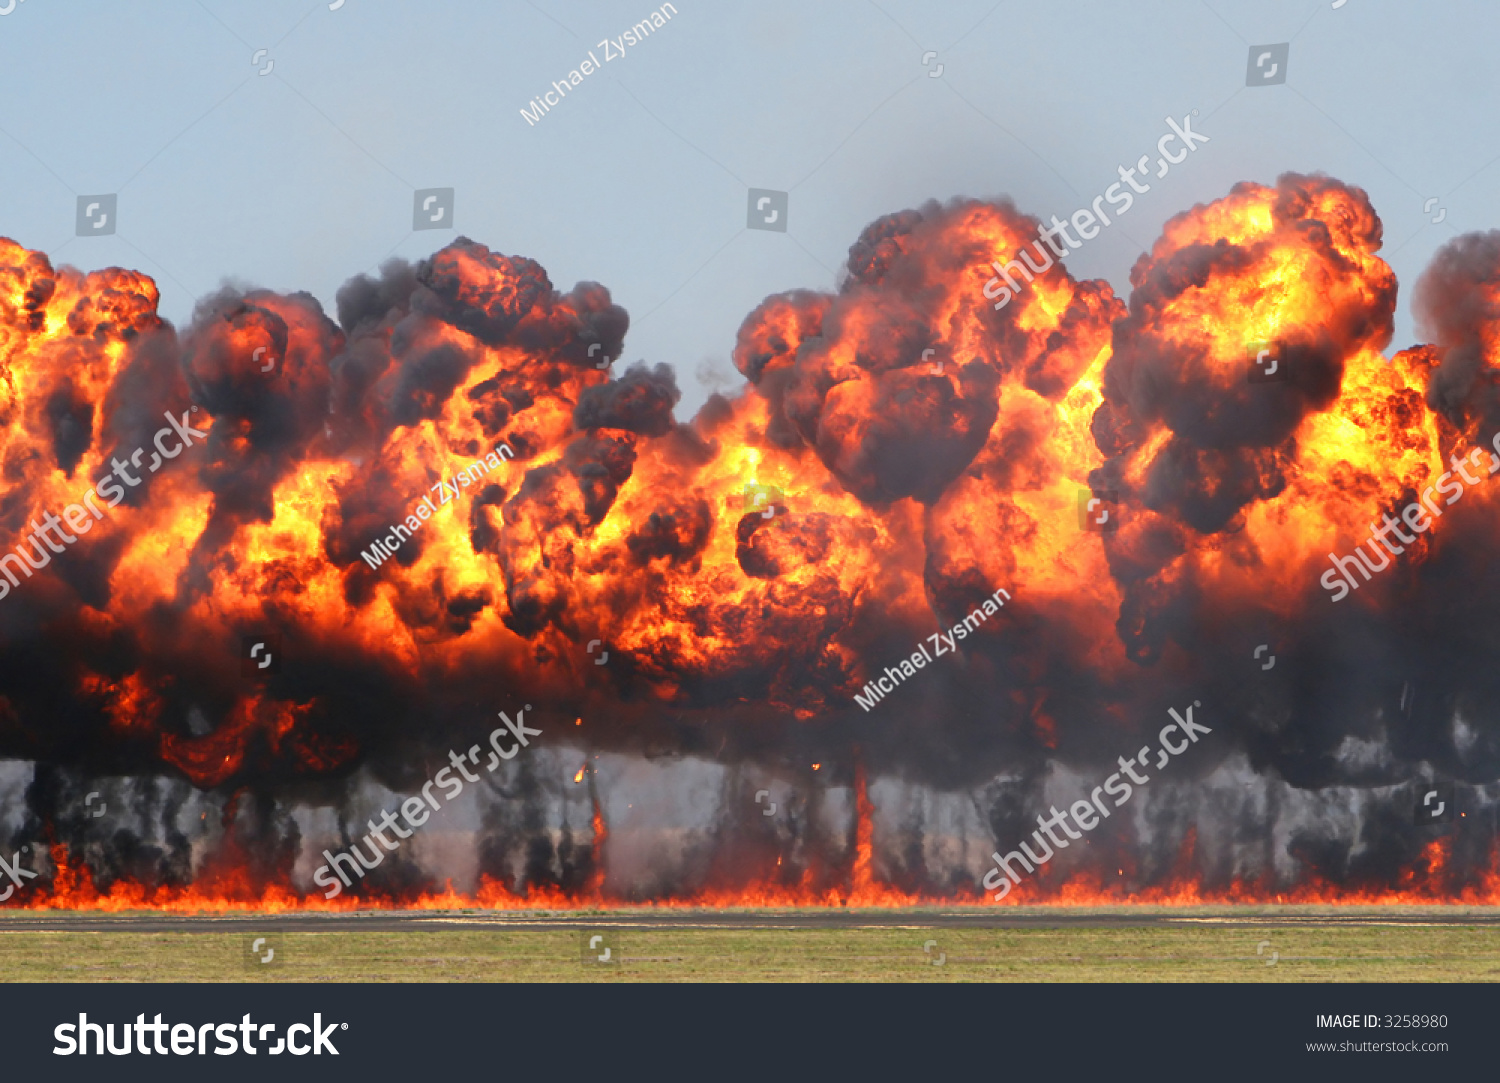 stock-photo-giant-explosion-a-wall-of-fi